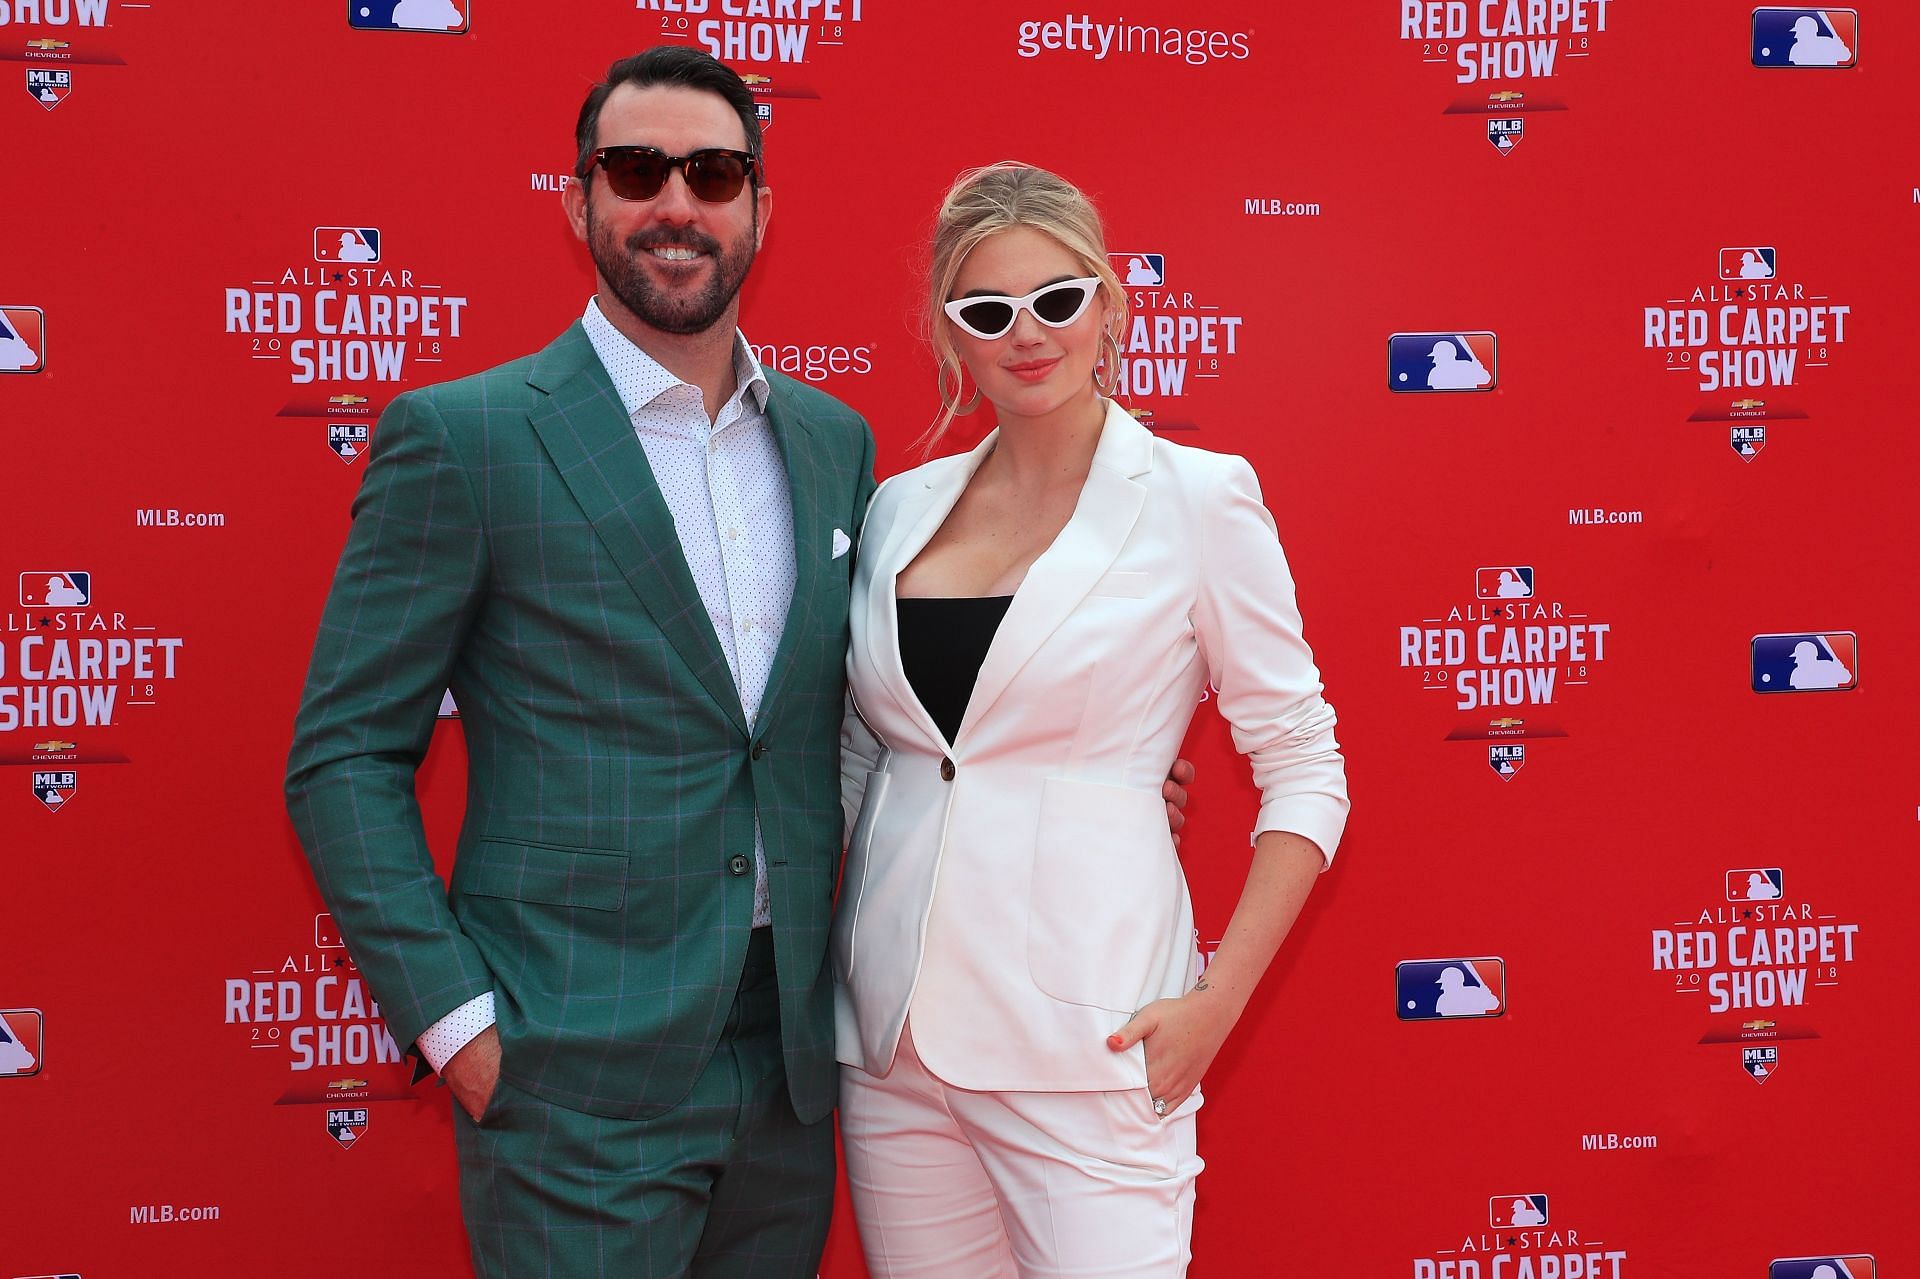 Kate Upton and Justin Verlander at the 89th MLB All-Star Game Red Carpet Show